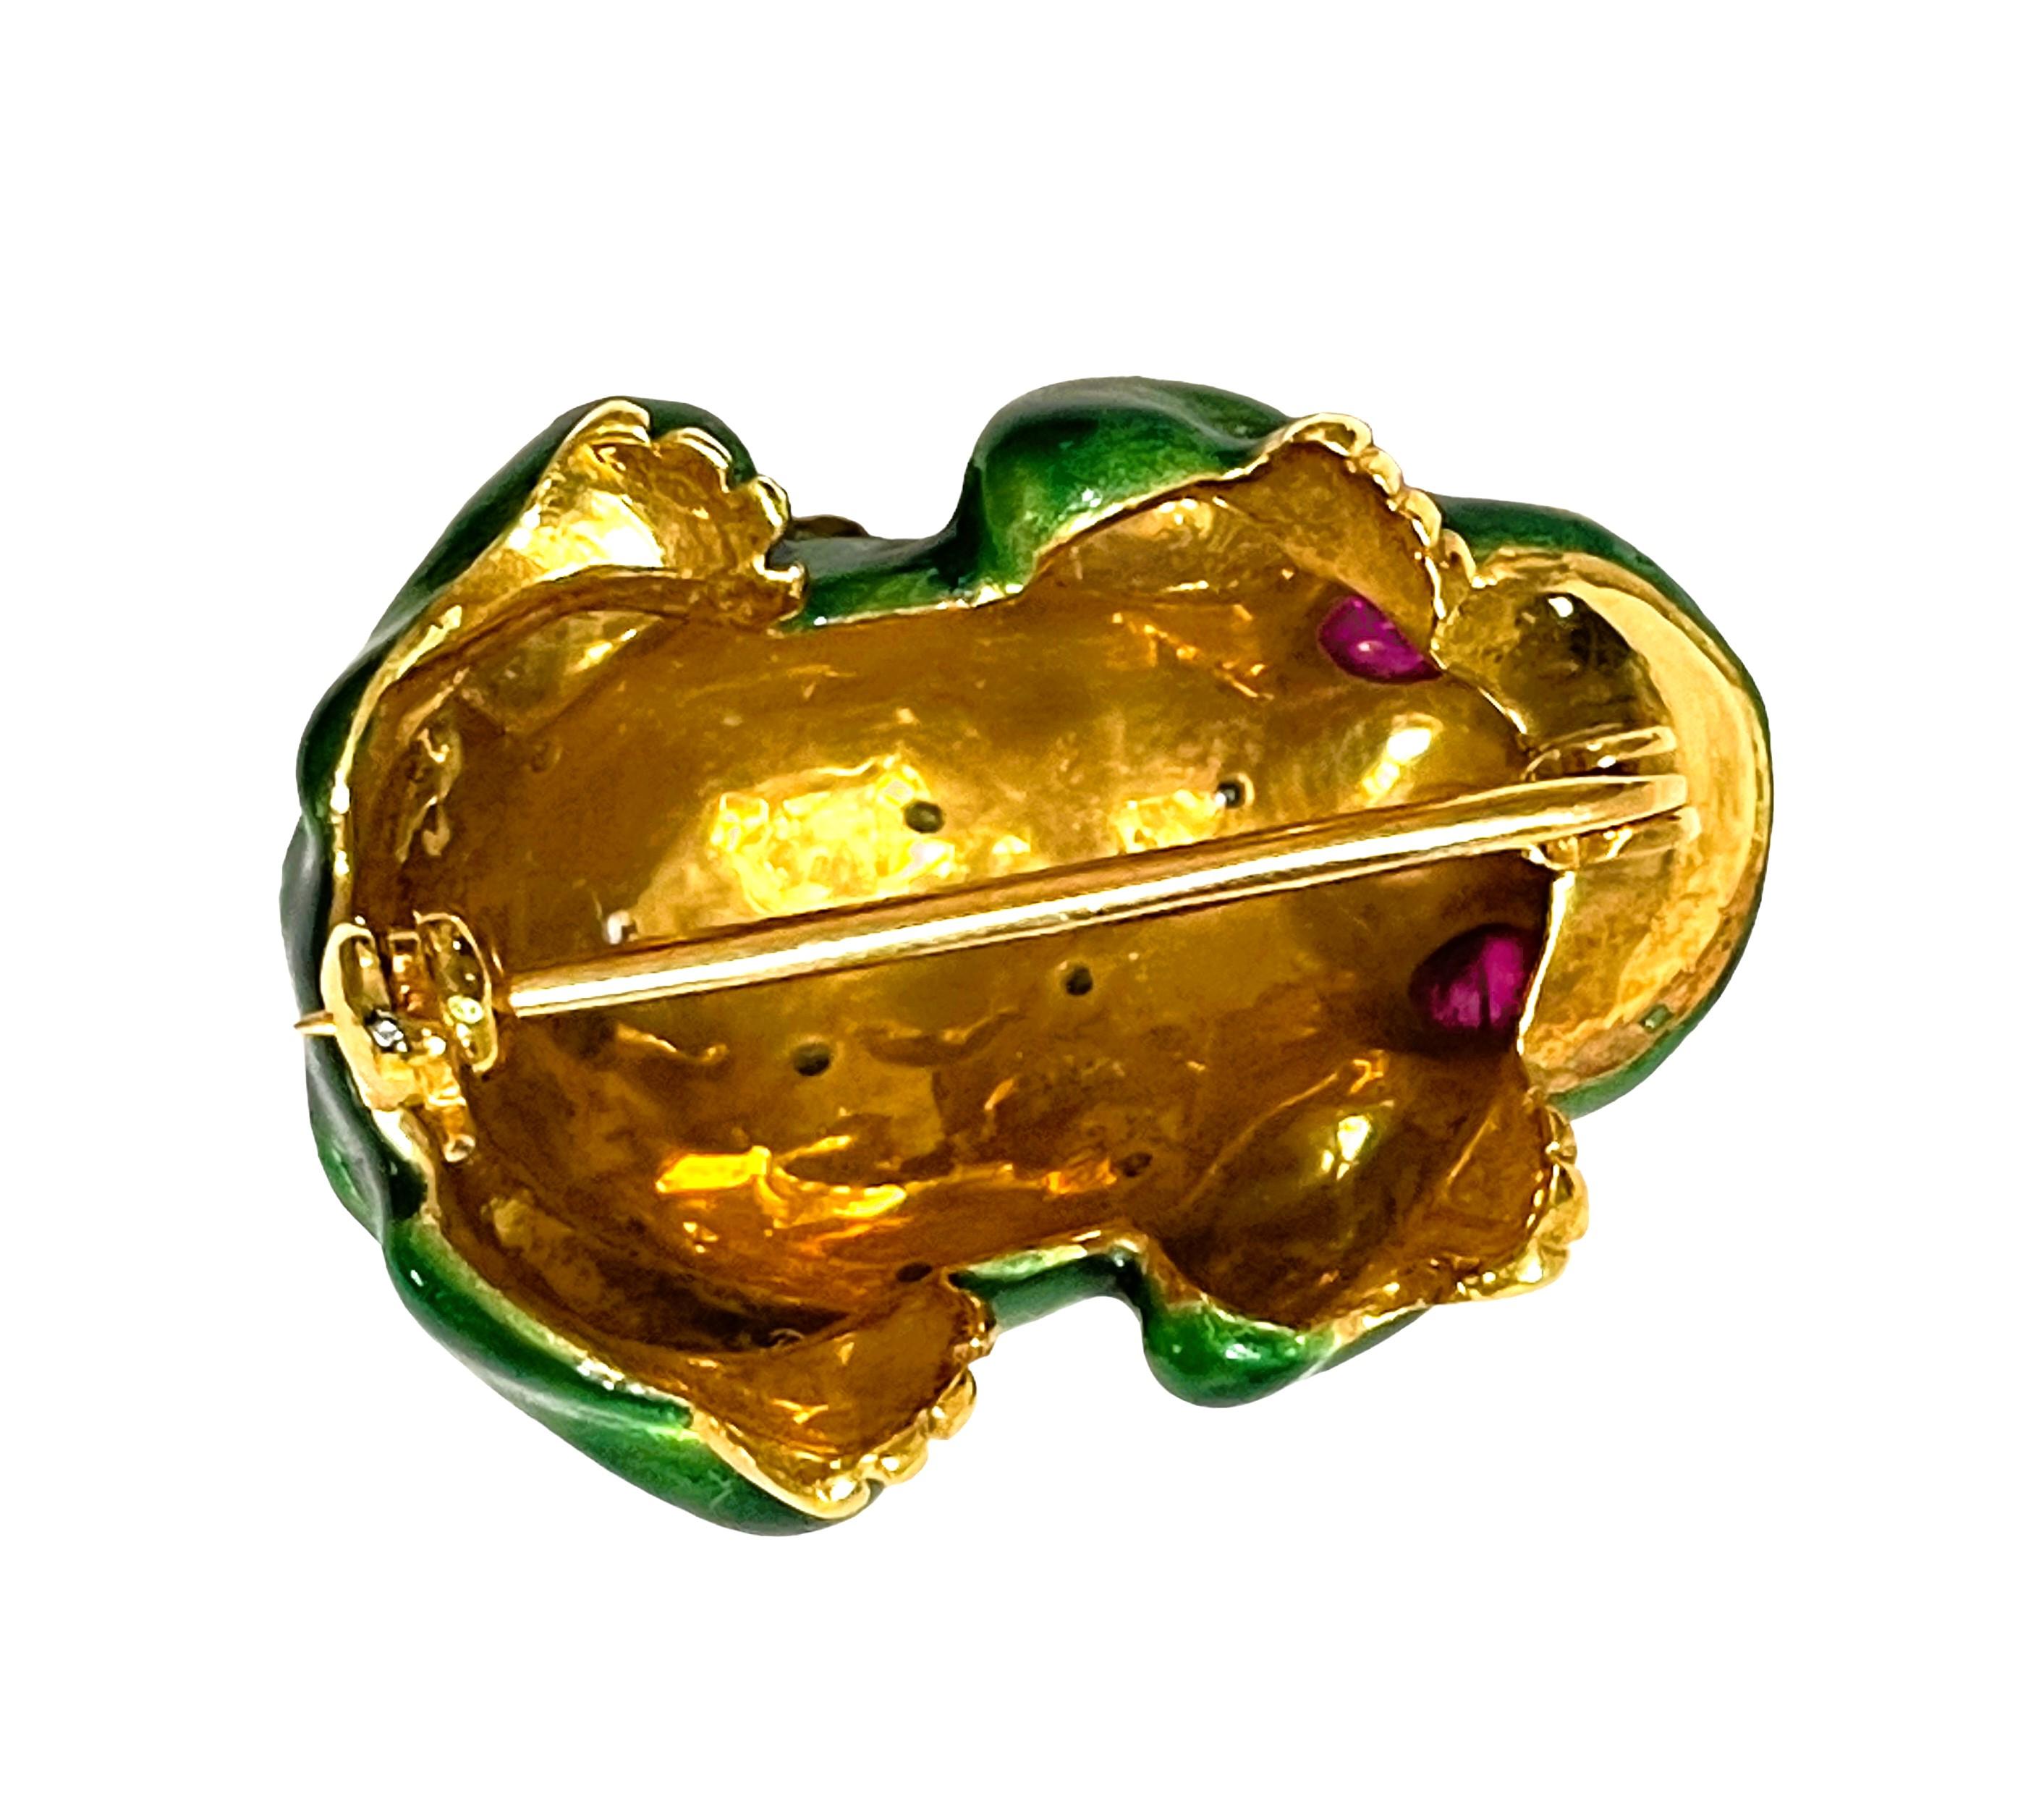 Handmade 21k Yellow Gold Enamel Frog Pin/Pedant with Ruby Eyes and Diamond Bumps 1